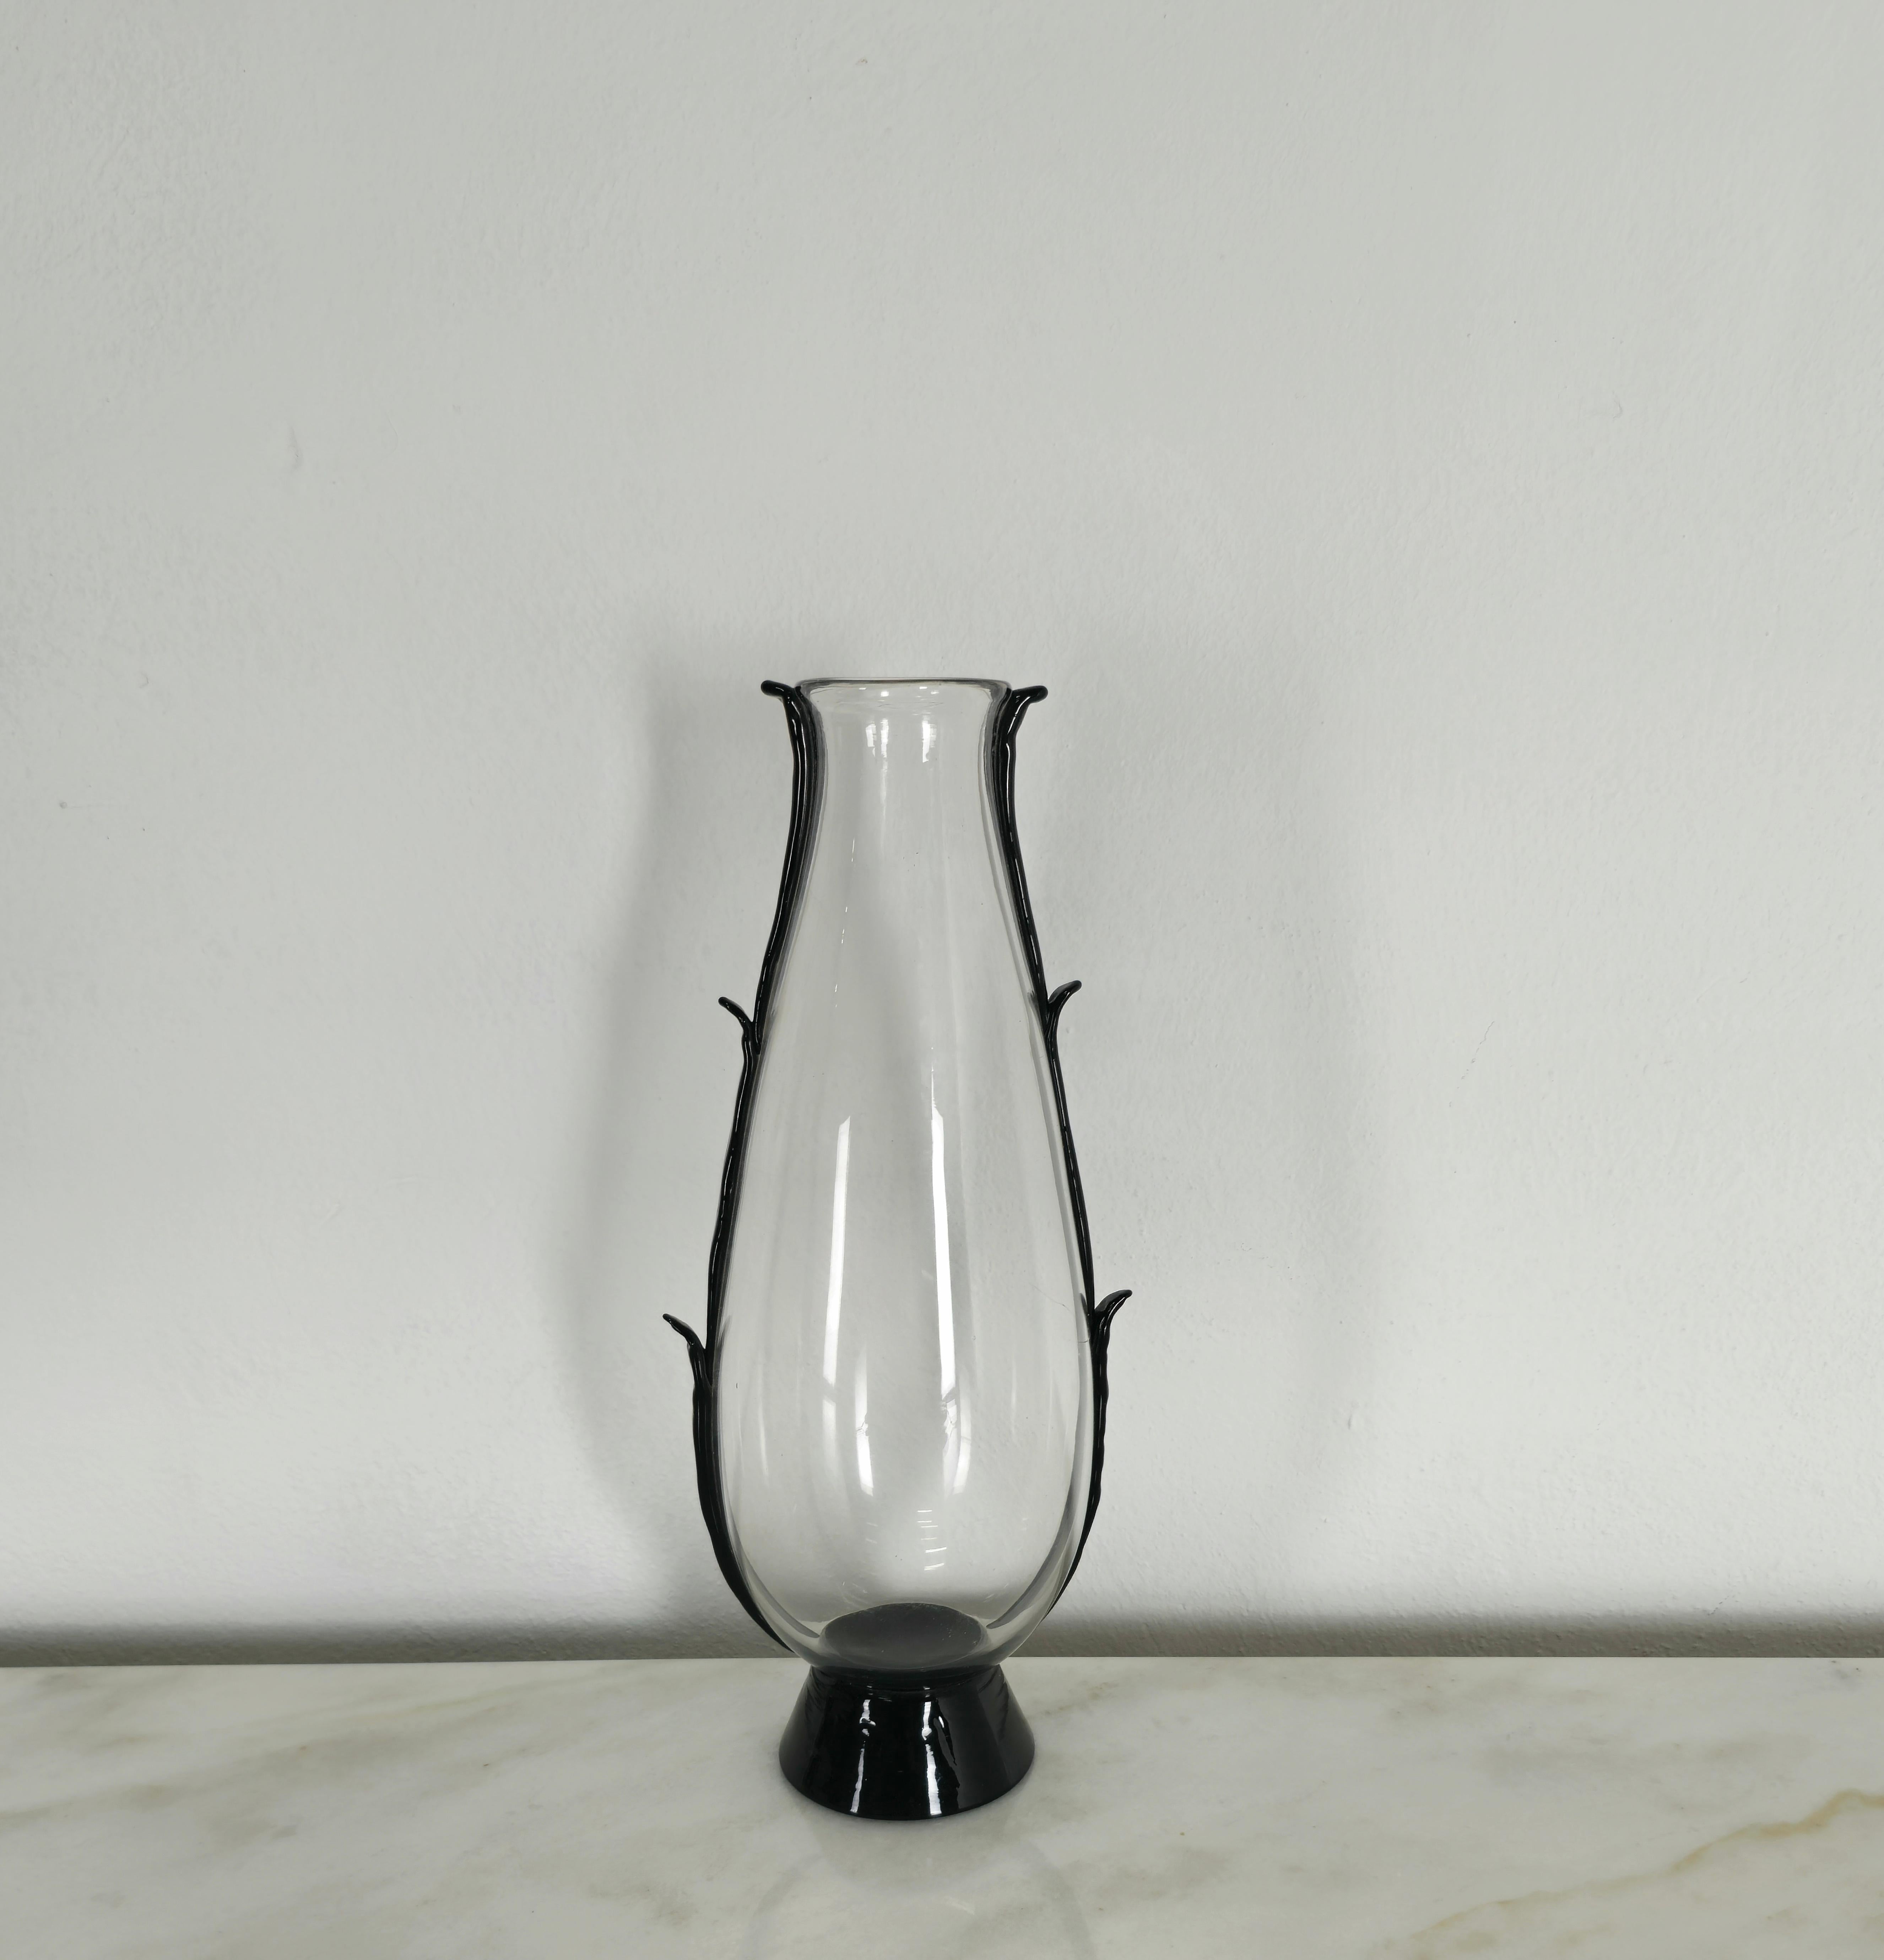 Rare and elegant vase designed by the designer Vittorio Zecchin and produced in the 1920s by the Venetian company MVM Cappellin.
The vase was made of transparent and black enamelled Murano glass with a circular base.



Note: We try to offer our